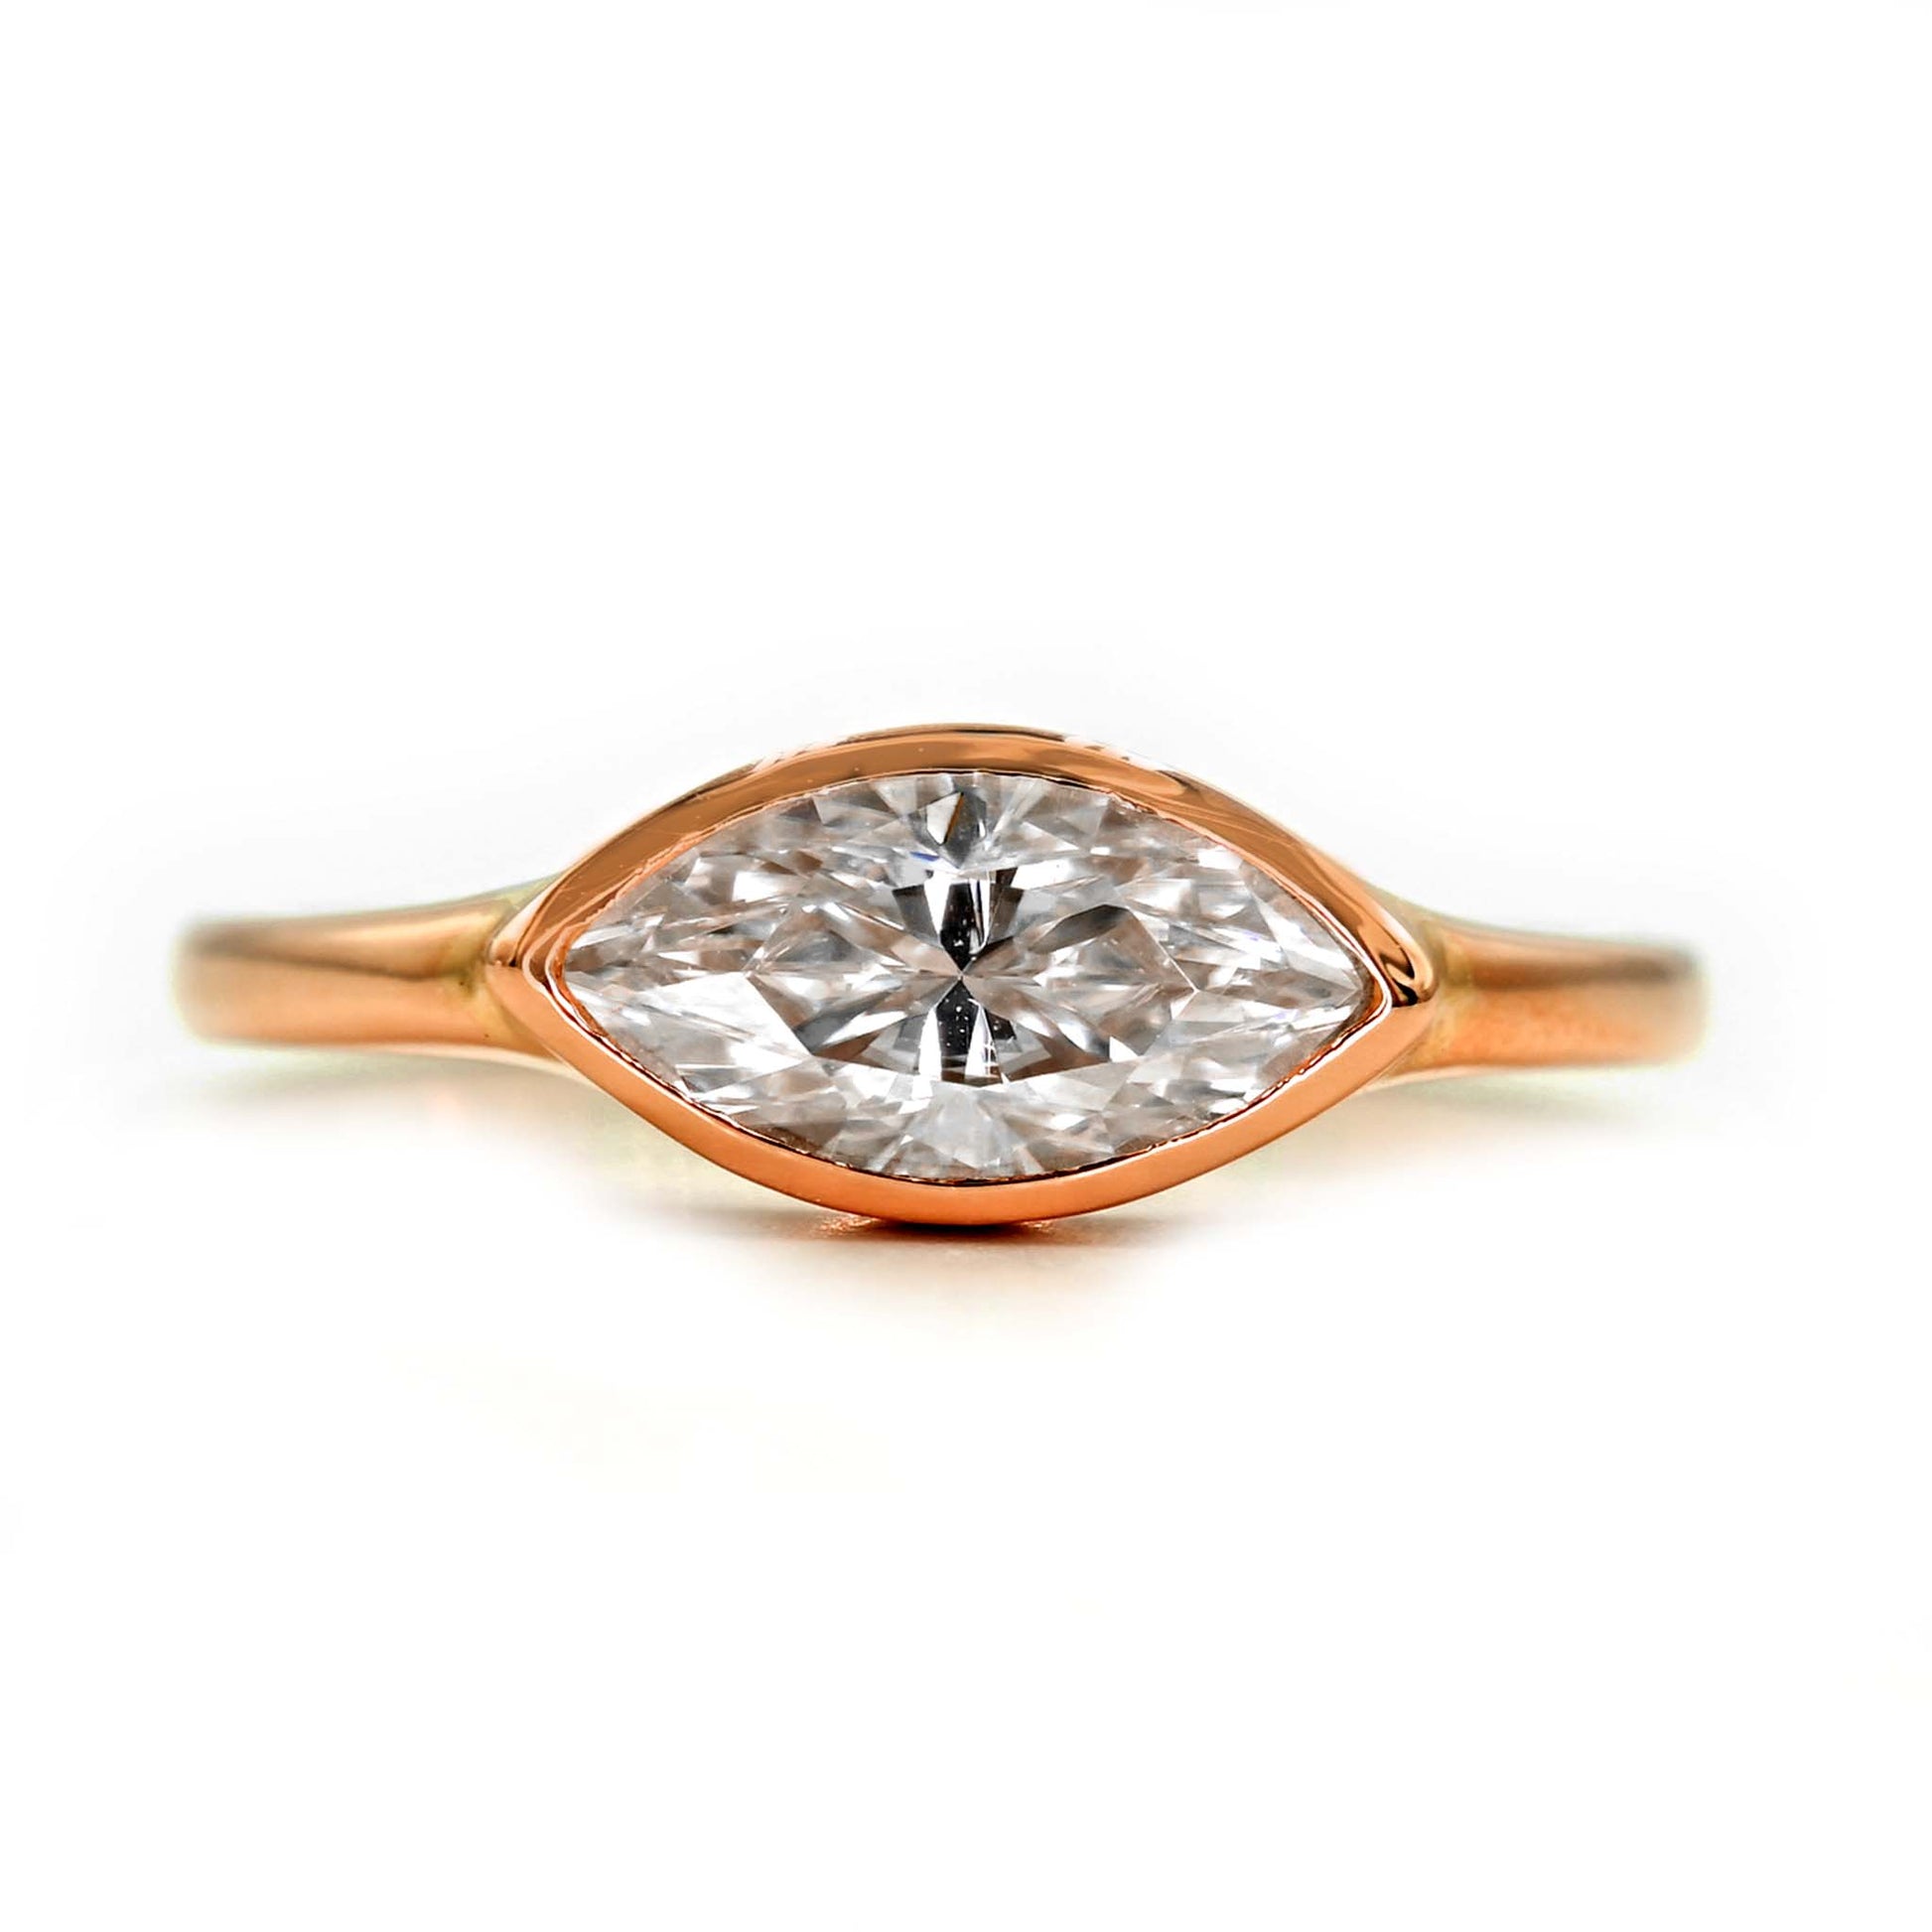 Marquise engagement ring handmade with earth-friendly moissanite and 14k rose gold. Available from Shiraz Jewelry in Chiang Mai, Thailand